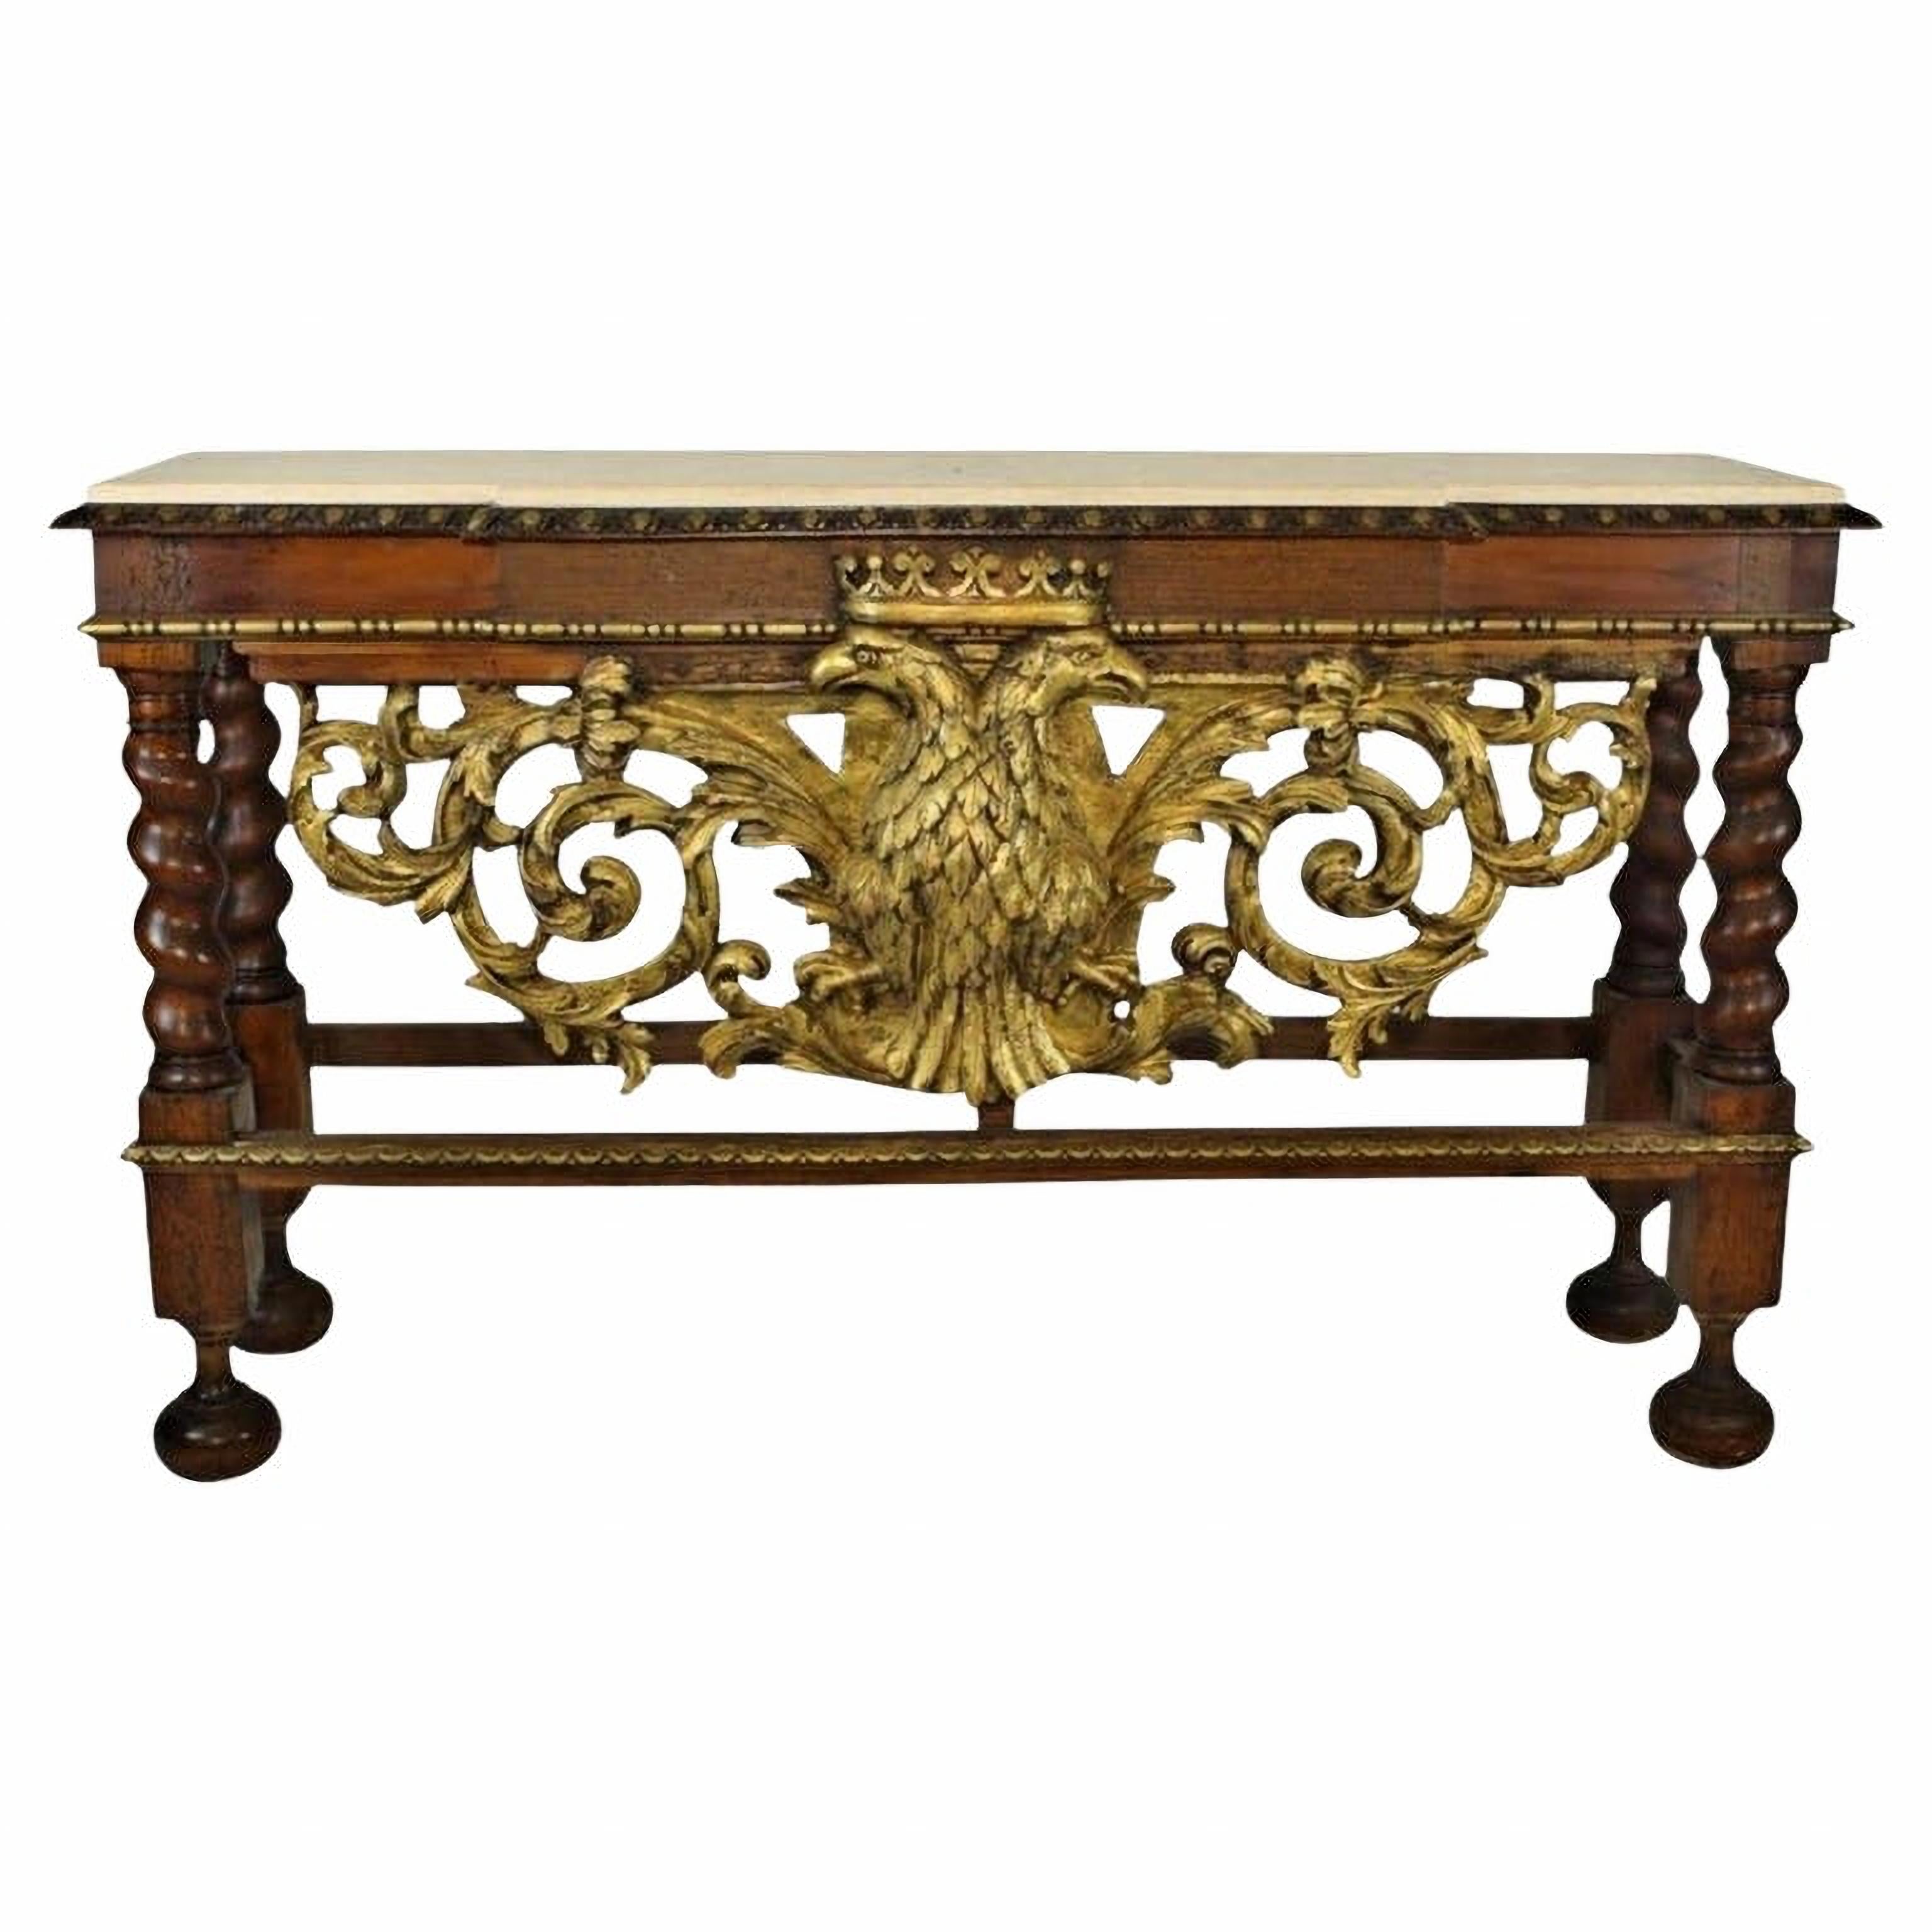 Impressive 19th century Italian walnut wall table

Richly carved and gilded enriched by Raff carving crowned eagles, yellow Sicilian marble top 19th century
Measures: 100cm x 166cm x 46cm
Good condition for the time.